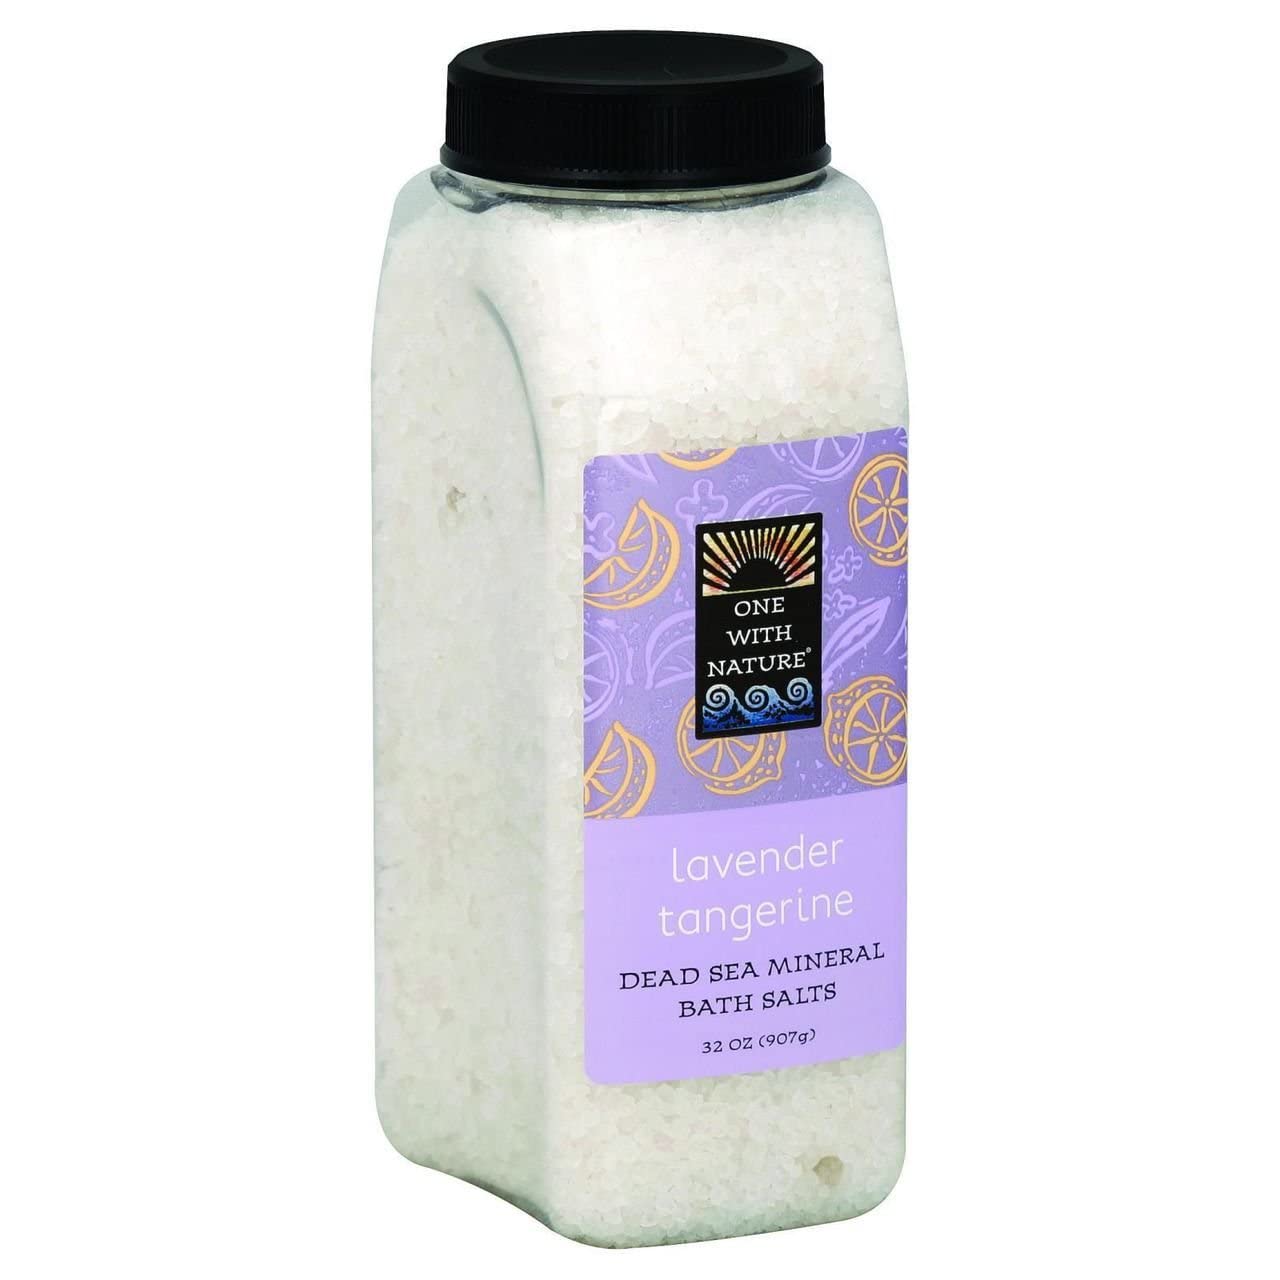 One With Nature Bath Salt Relax Lavender, 32 oz